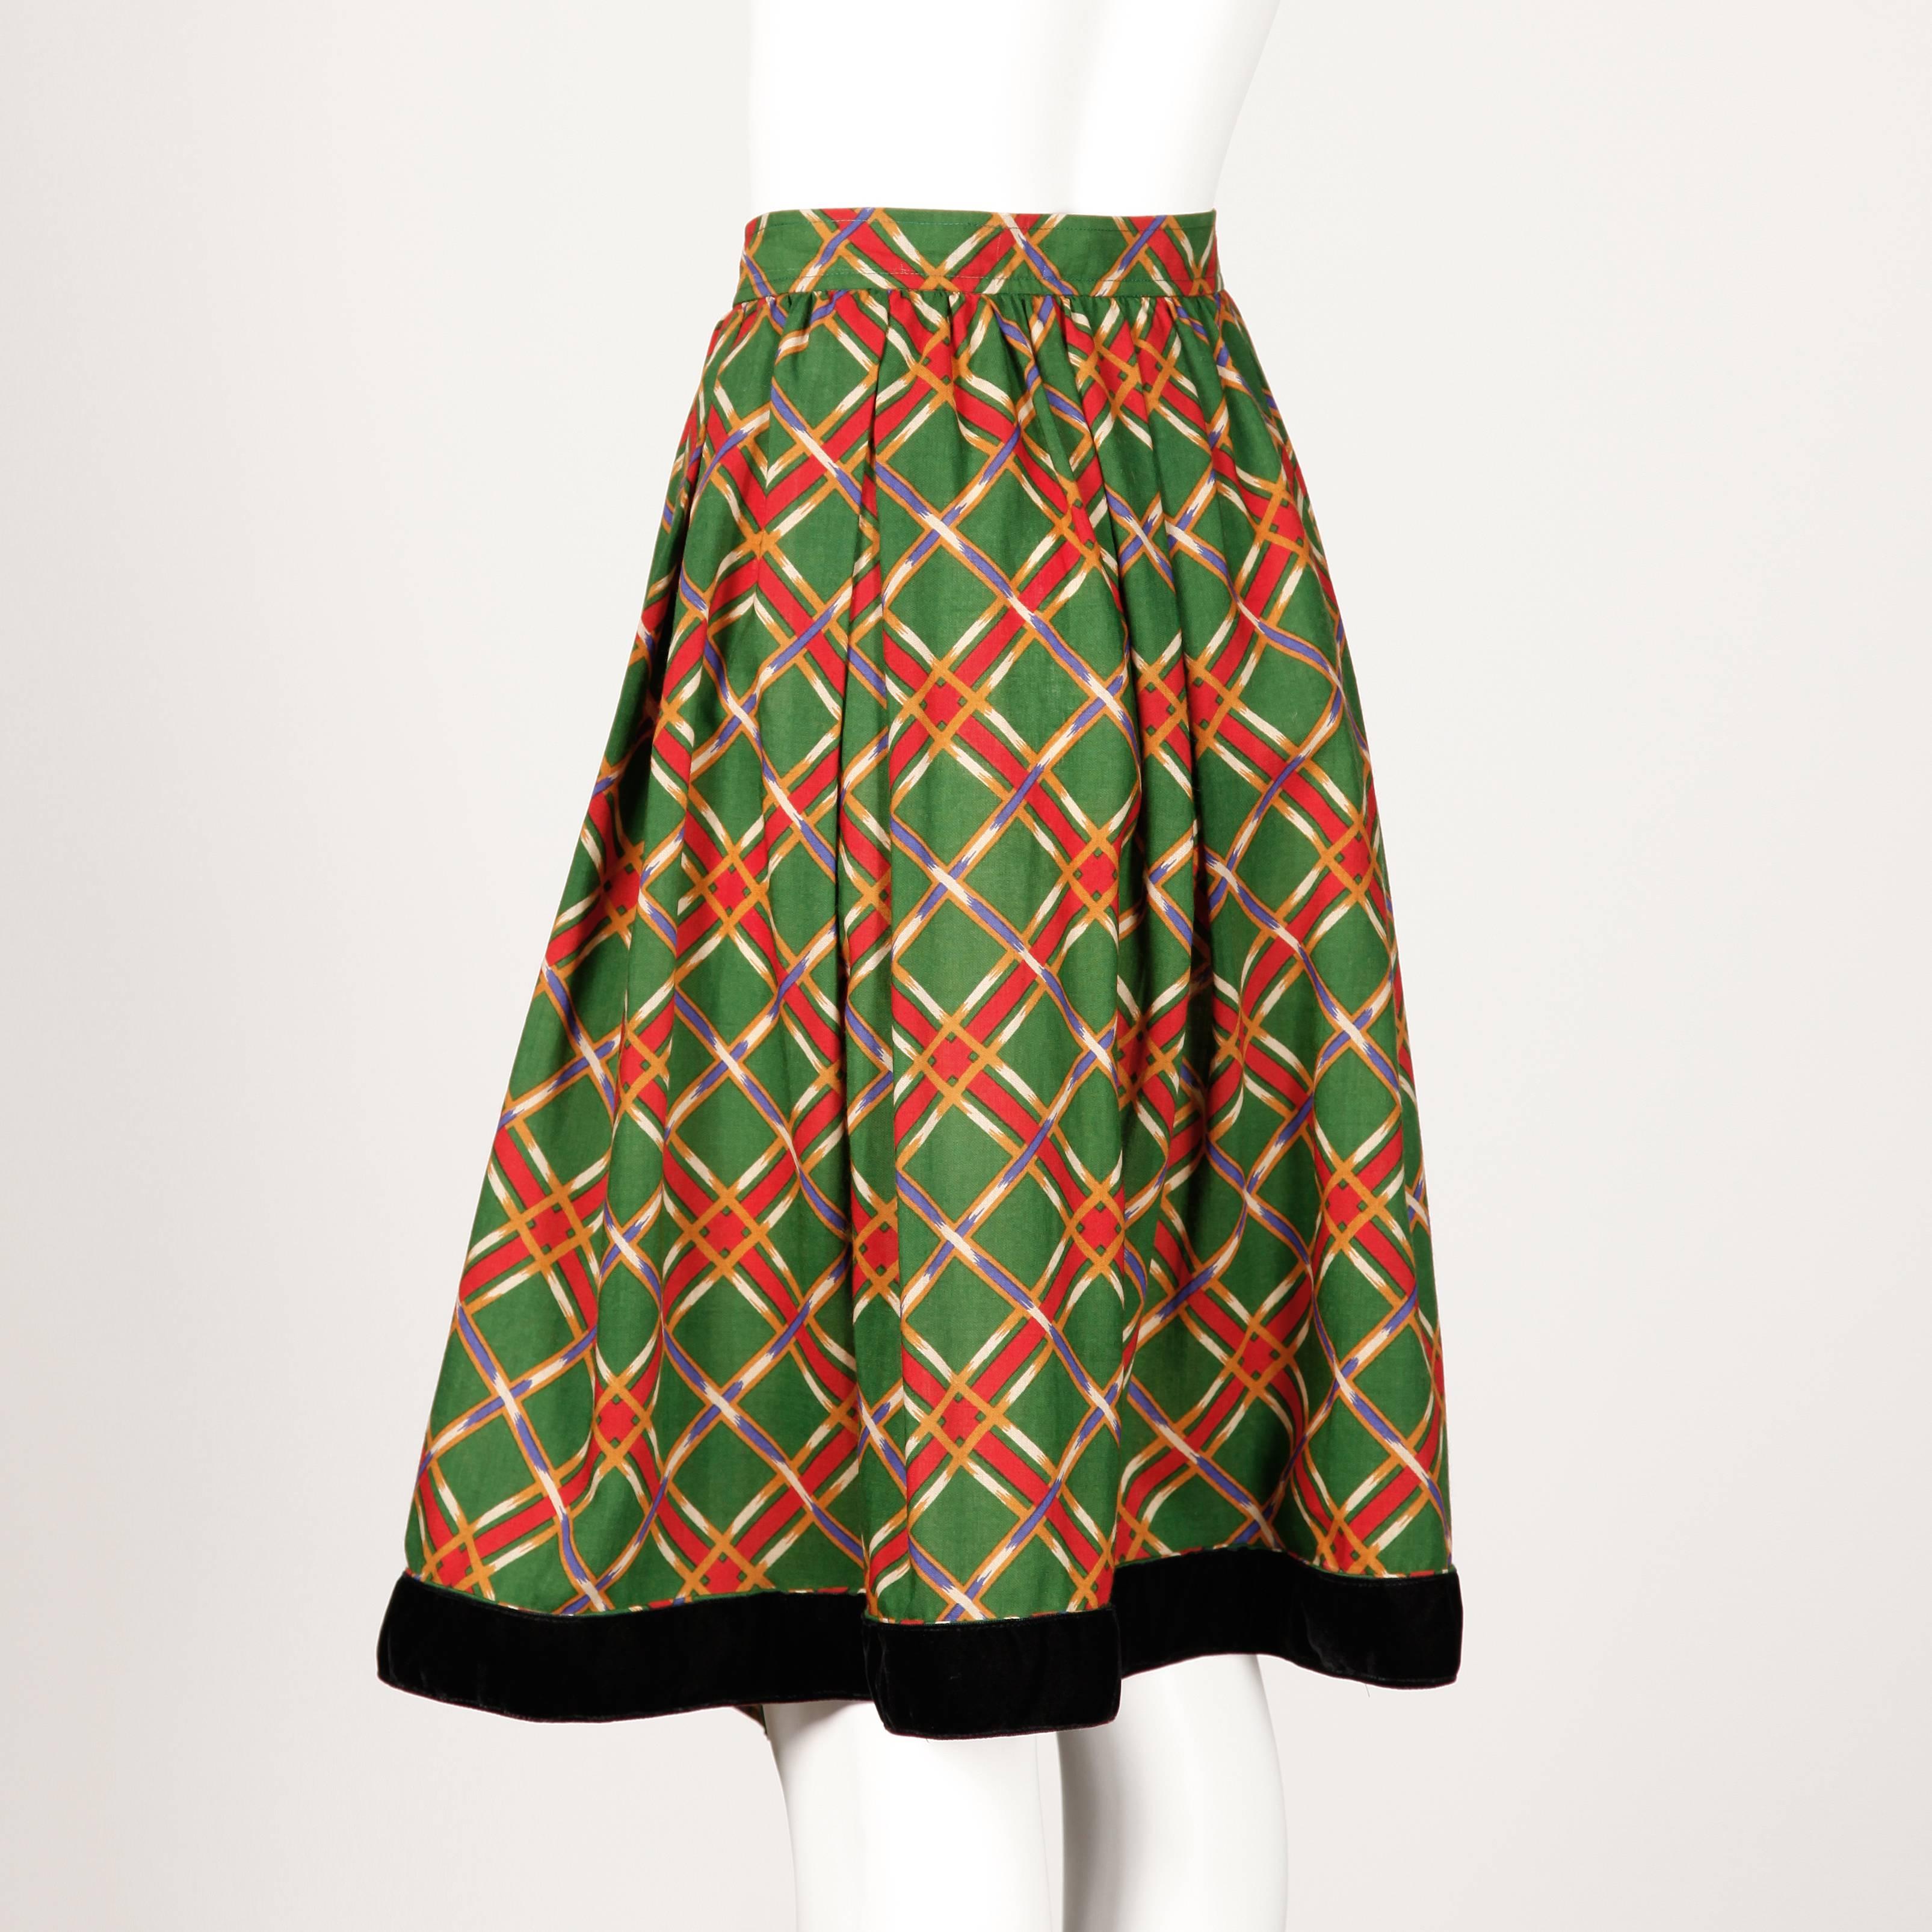 Yves Saint Laurent 1970s Vintage Plaid Wool Midi Skirt In Excellent Condition For Sale In Sparks, NV